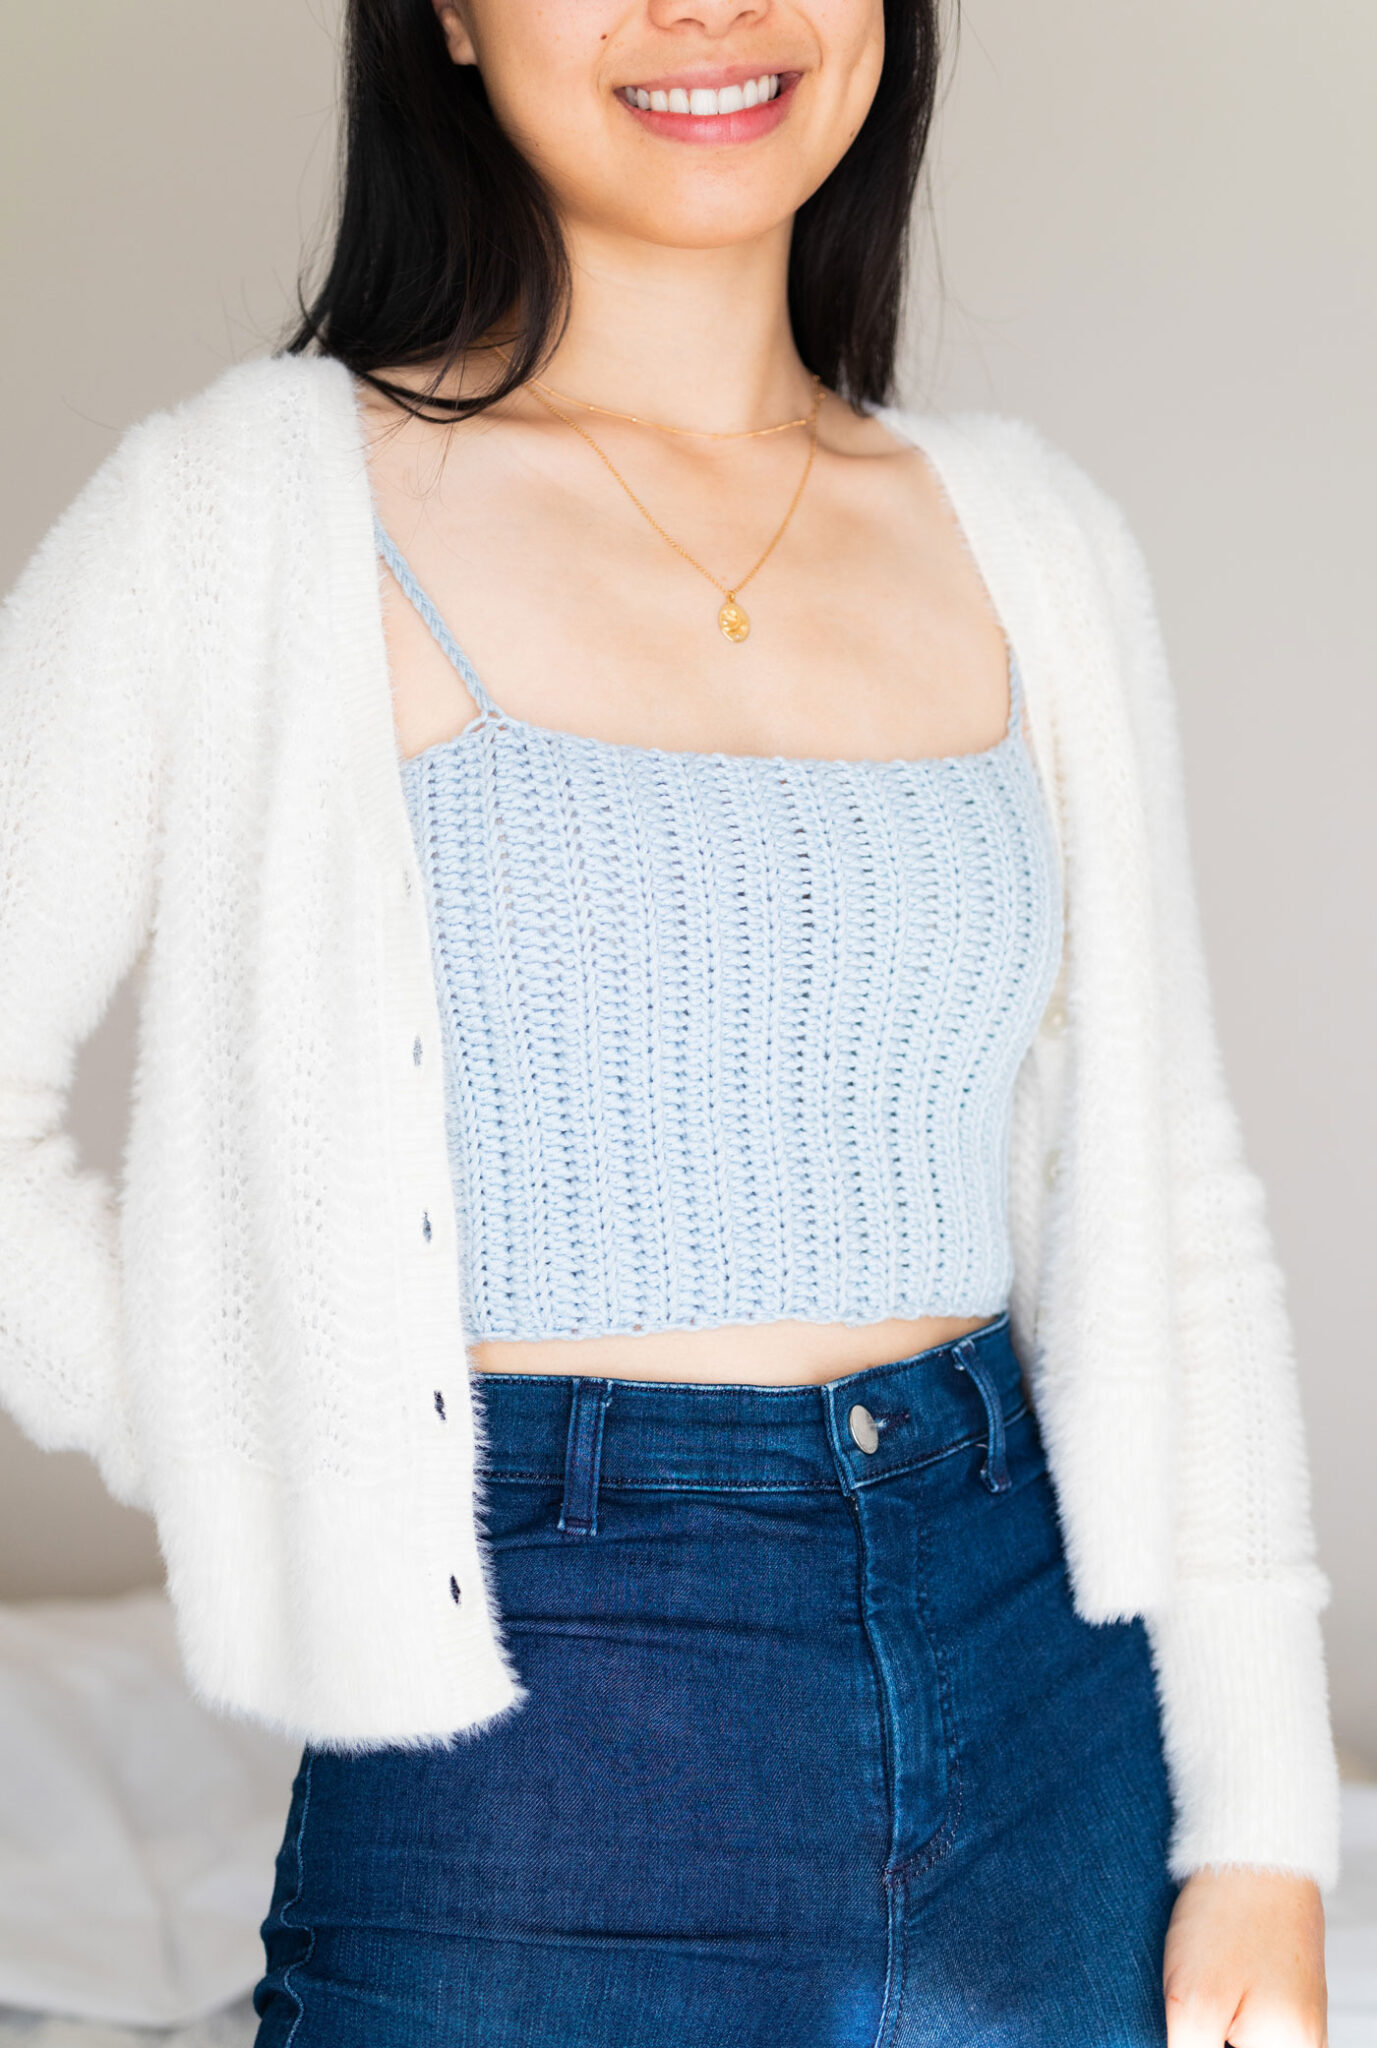 baby blue crochet crop top with fuzzy white cardigan free pattern